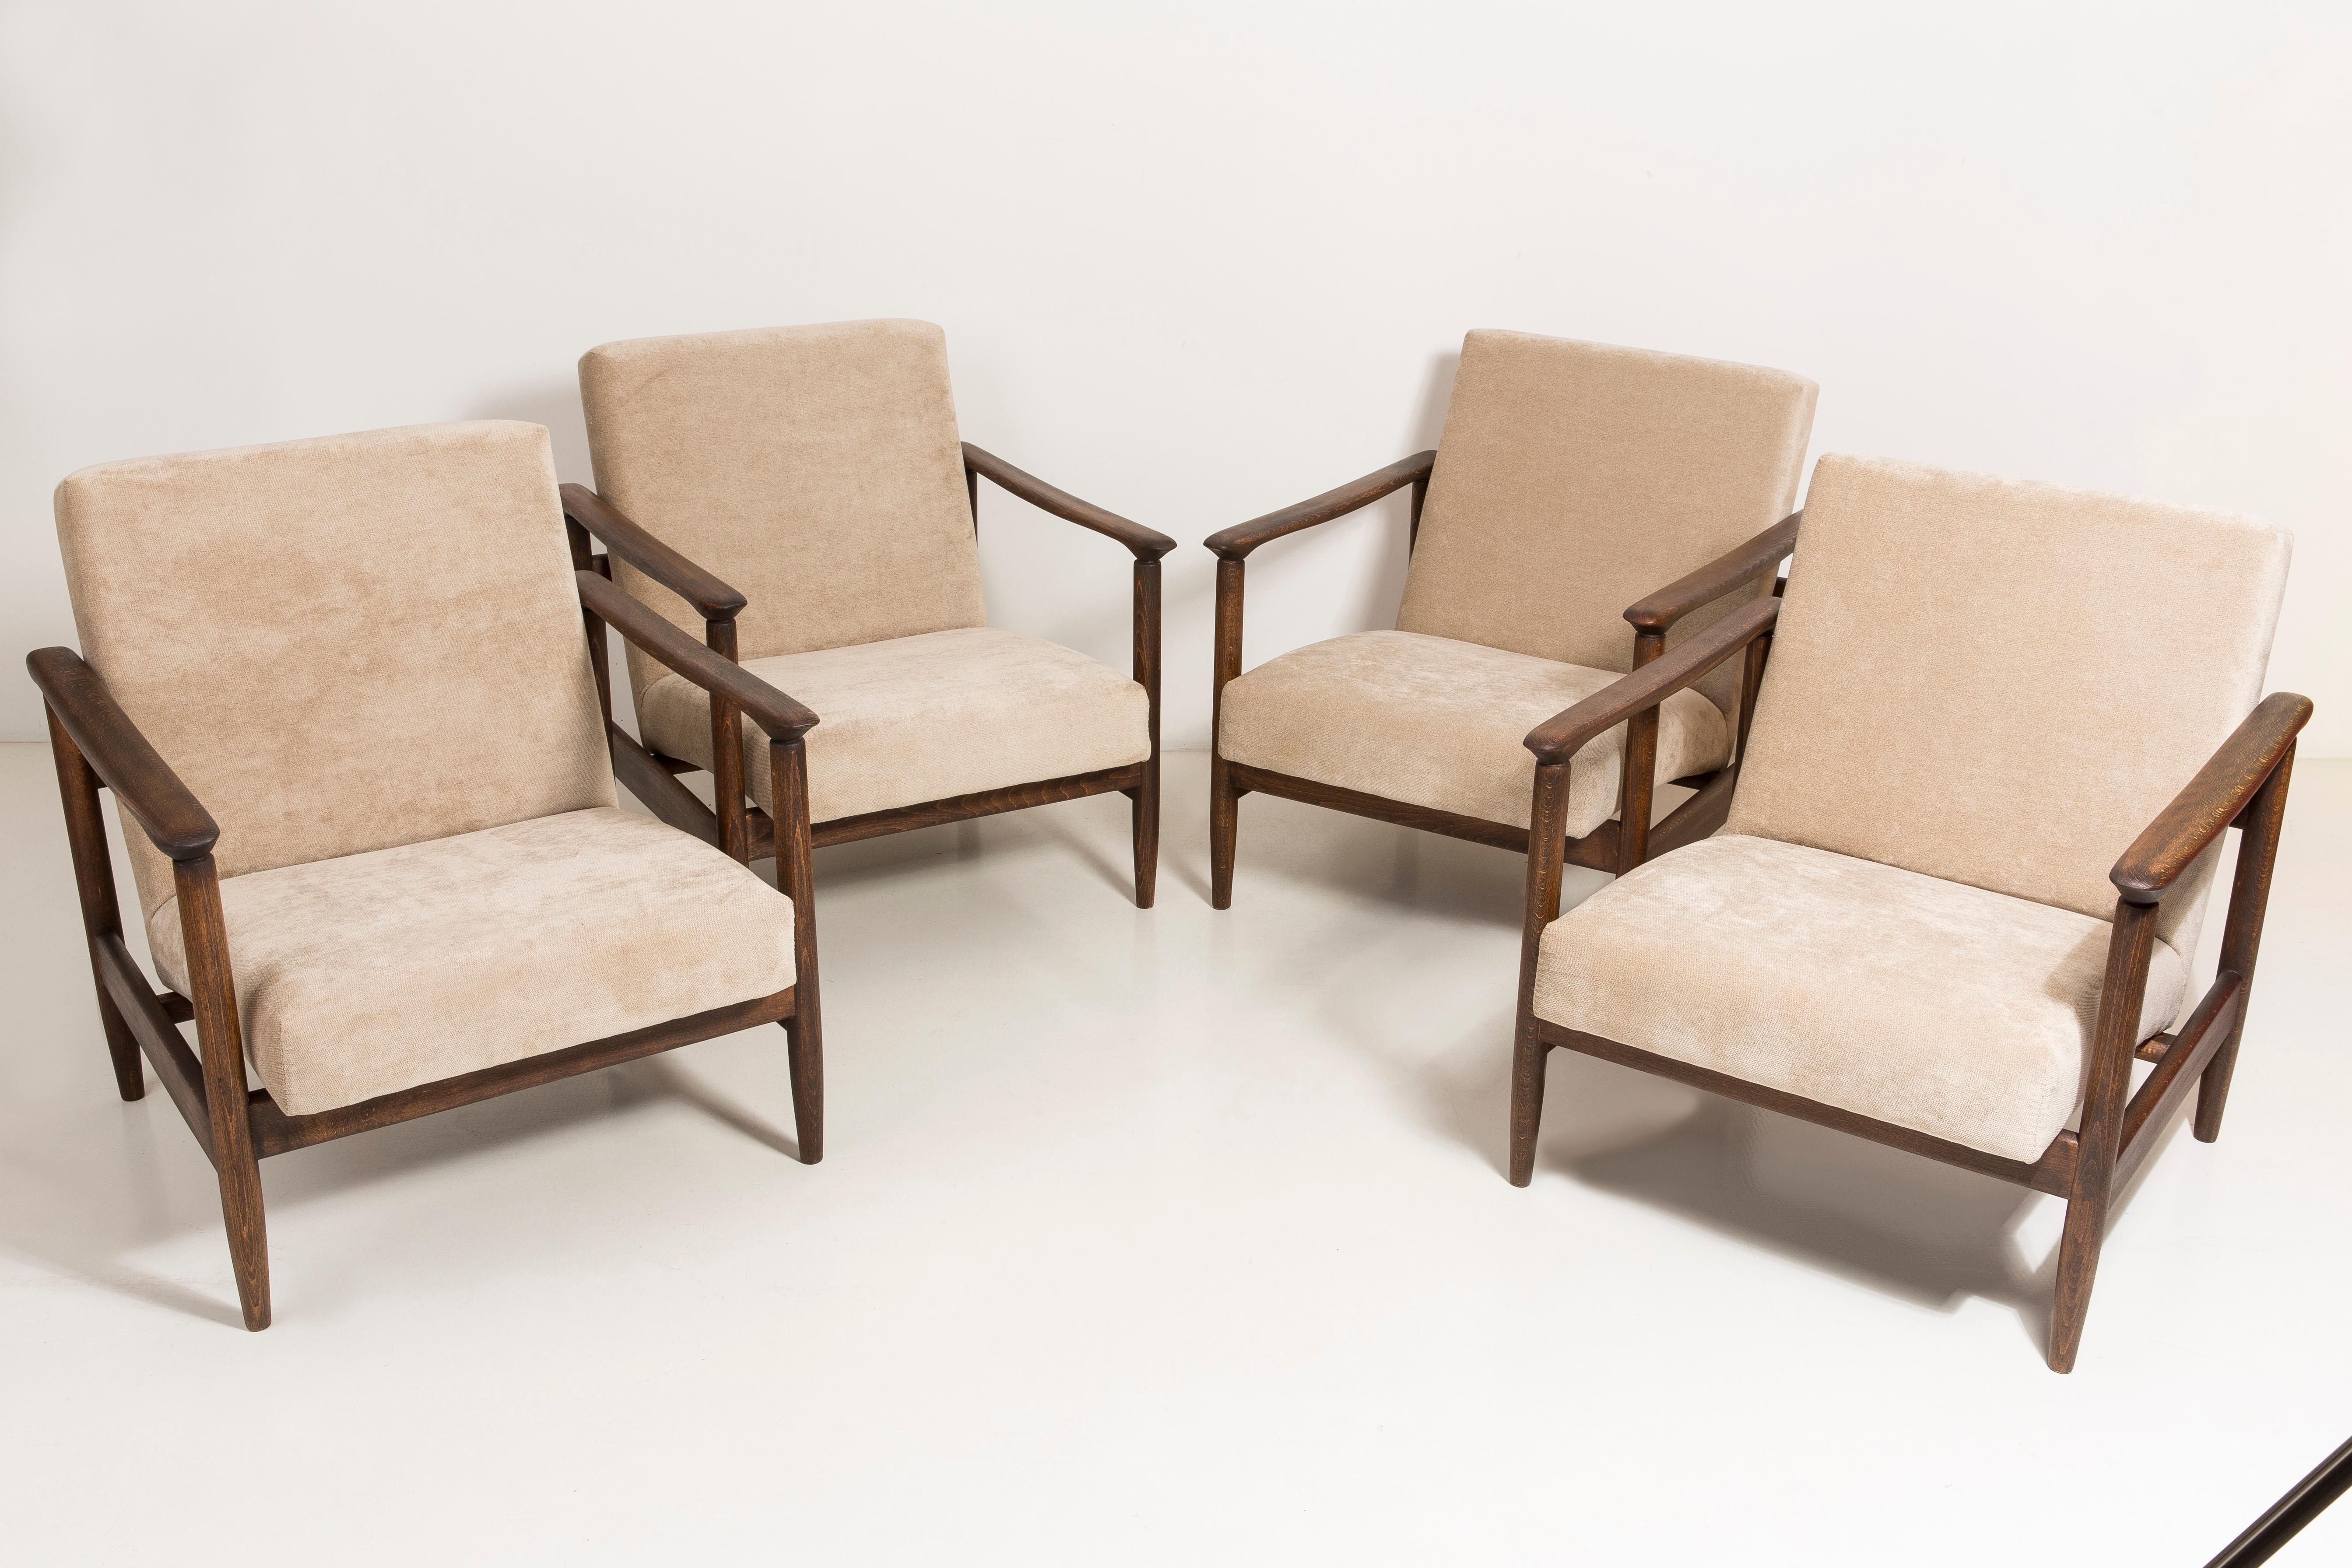 Hand-Crafted Set of Six Mid-Century Modern Beige Armchairs, Edmund Homa, 1960s, Poland For Sale